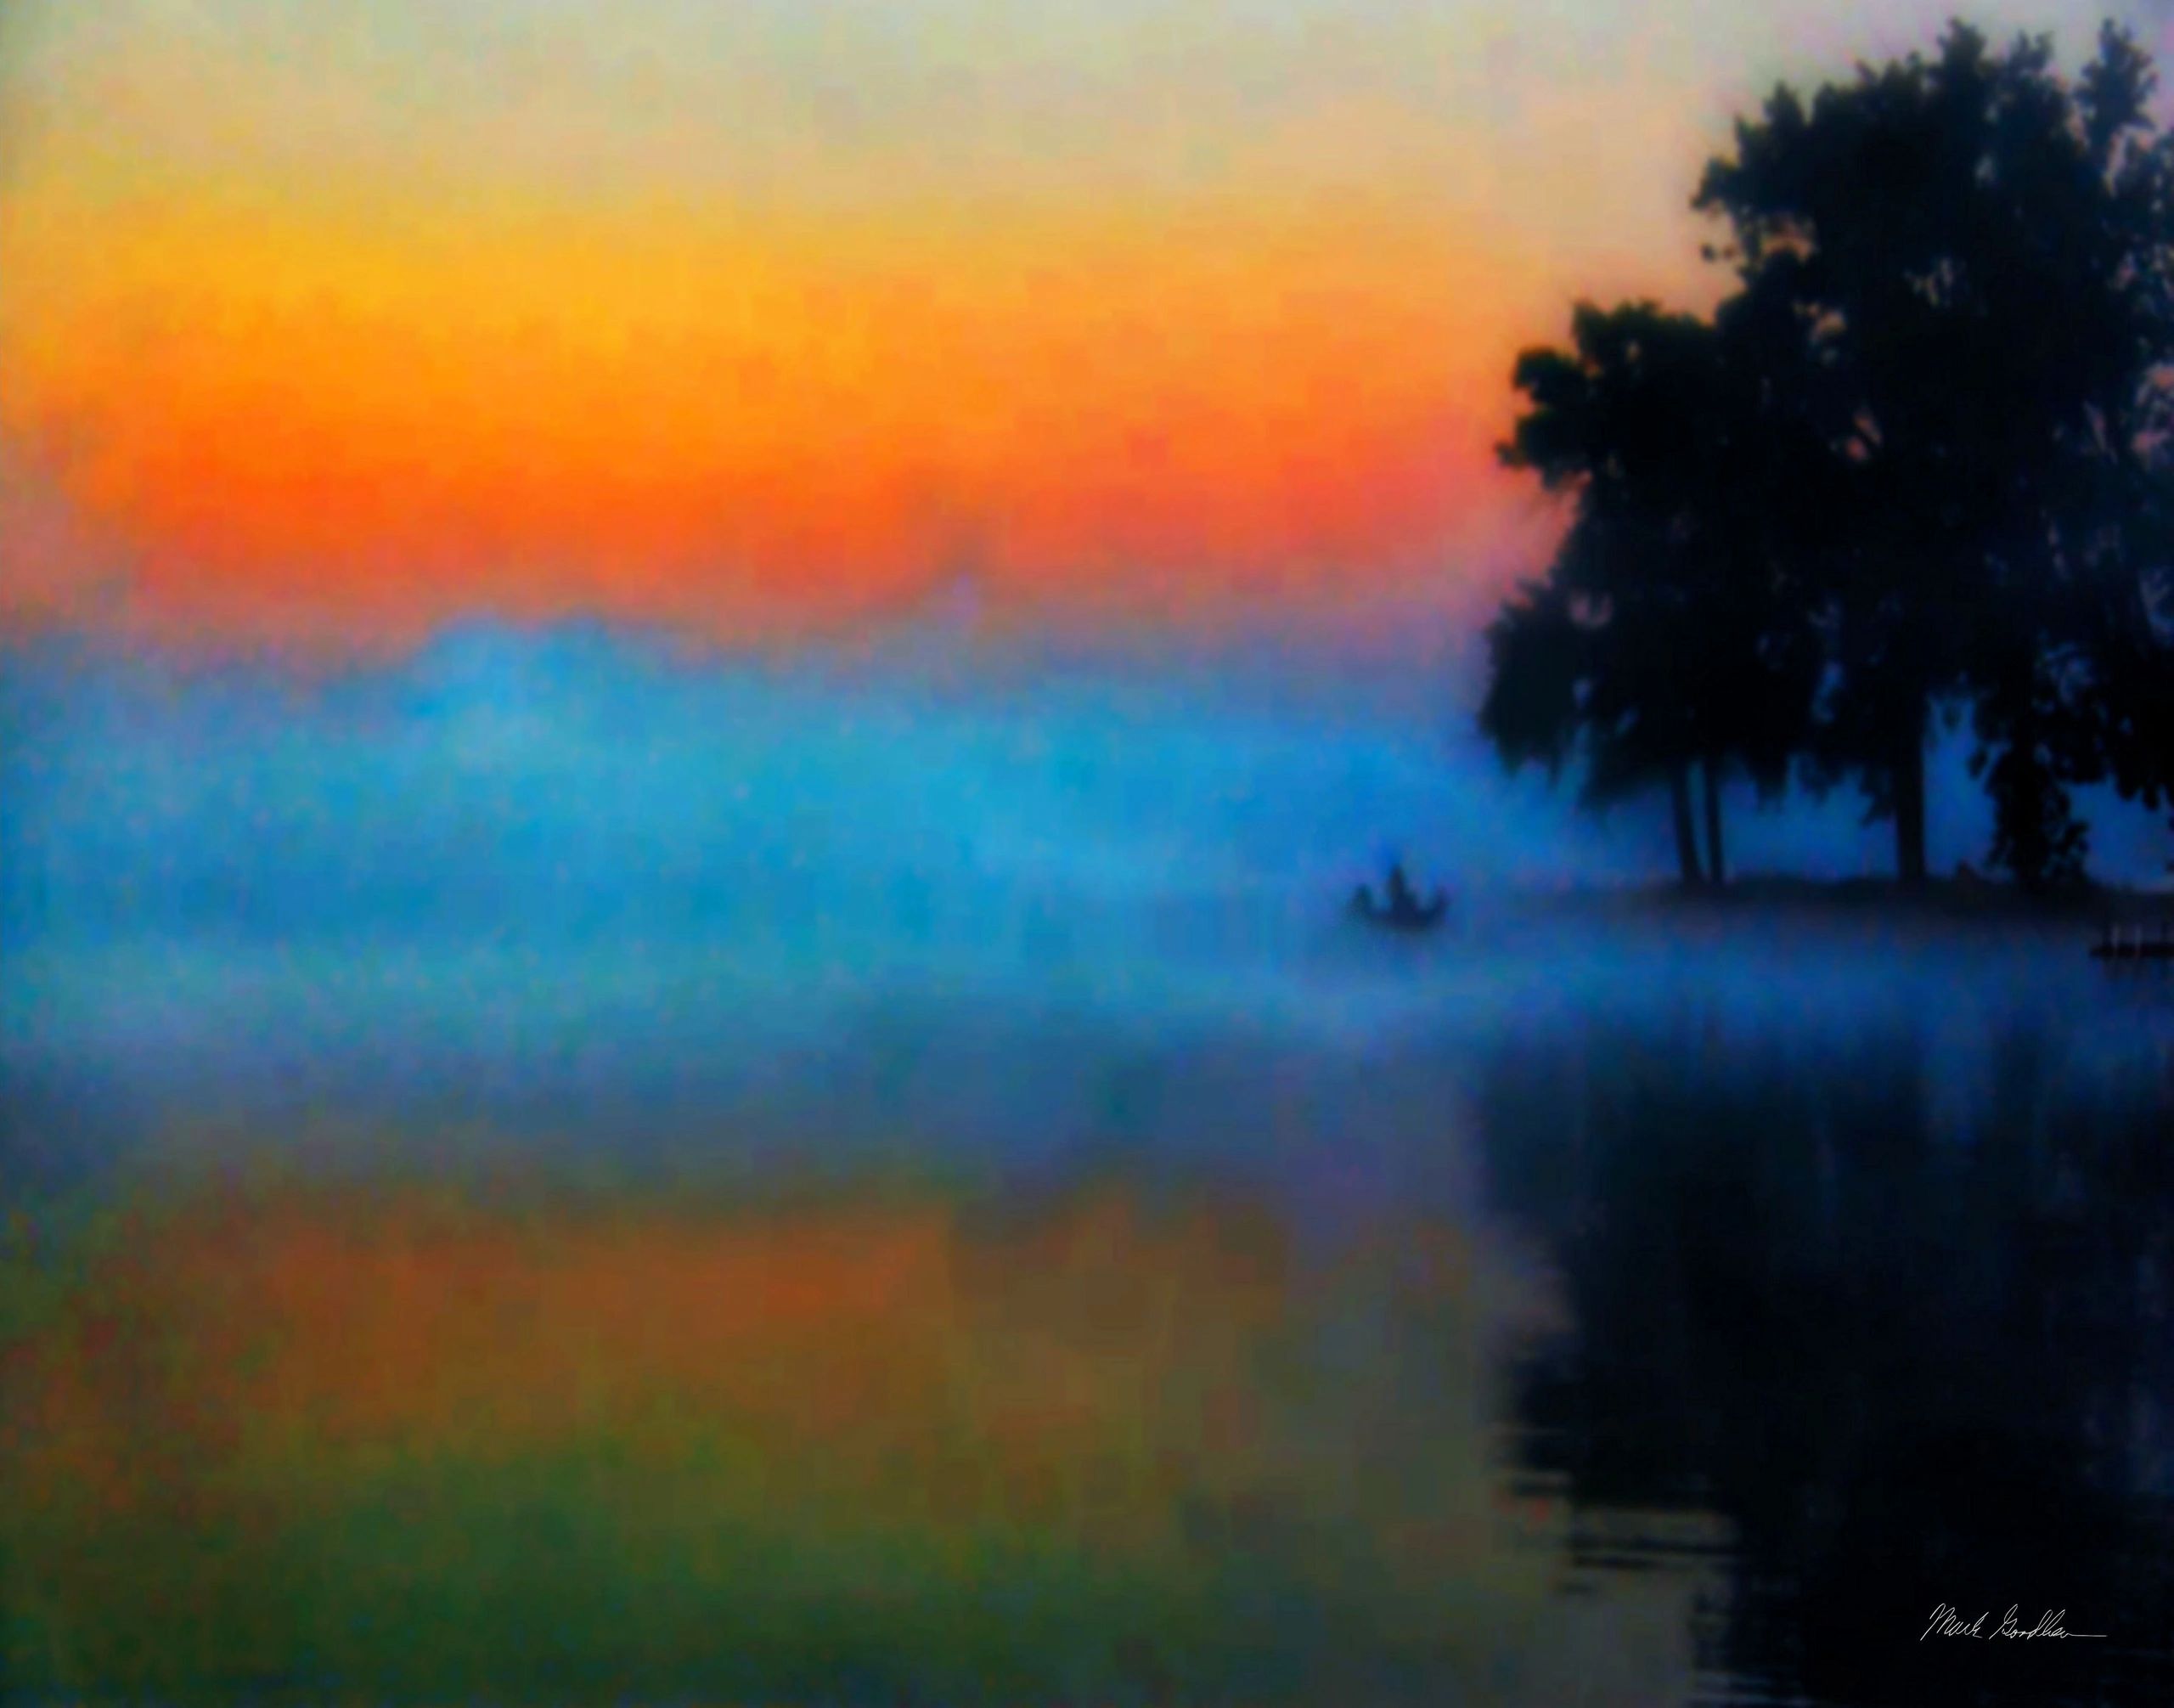 "Fishing in the mist 2" by Mark Goodhew Photography https://www.artpal.com/mgoodhew